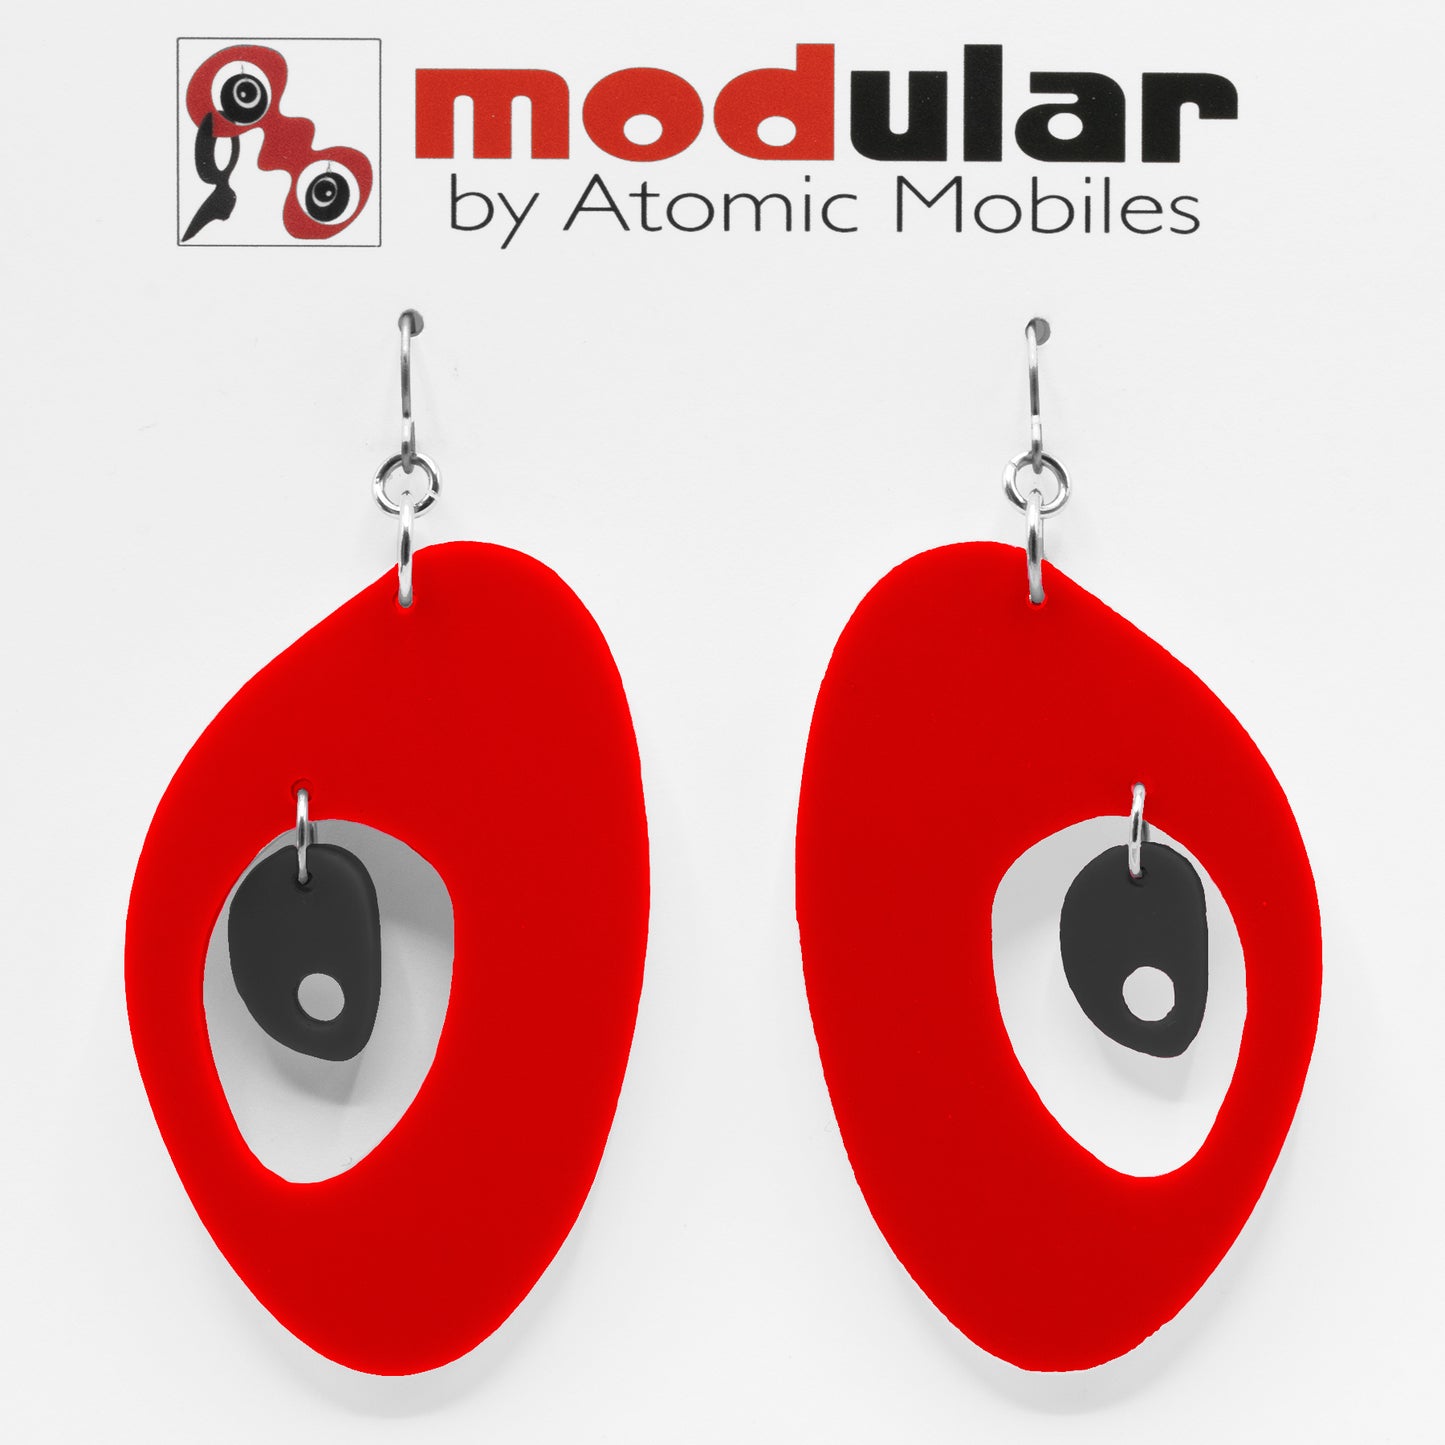 MODular Earrings - The Modernist Statement Earrings in Red and Black by AtomicMobiles.com - retro era inspired mod handmade jewelry